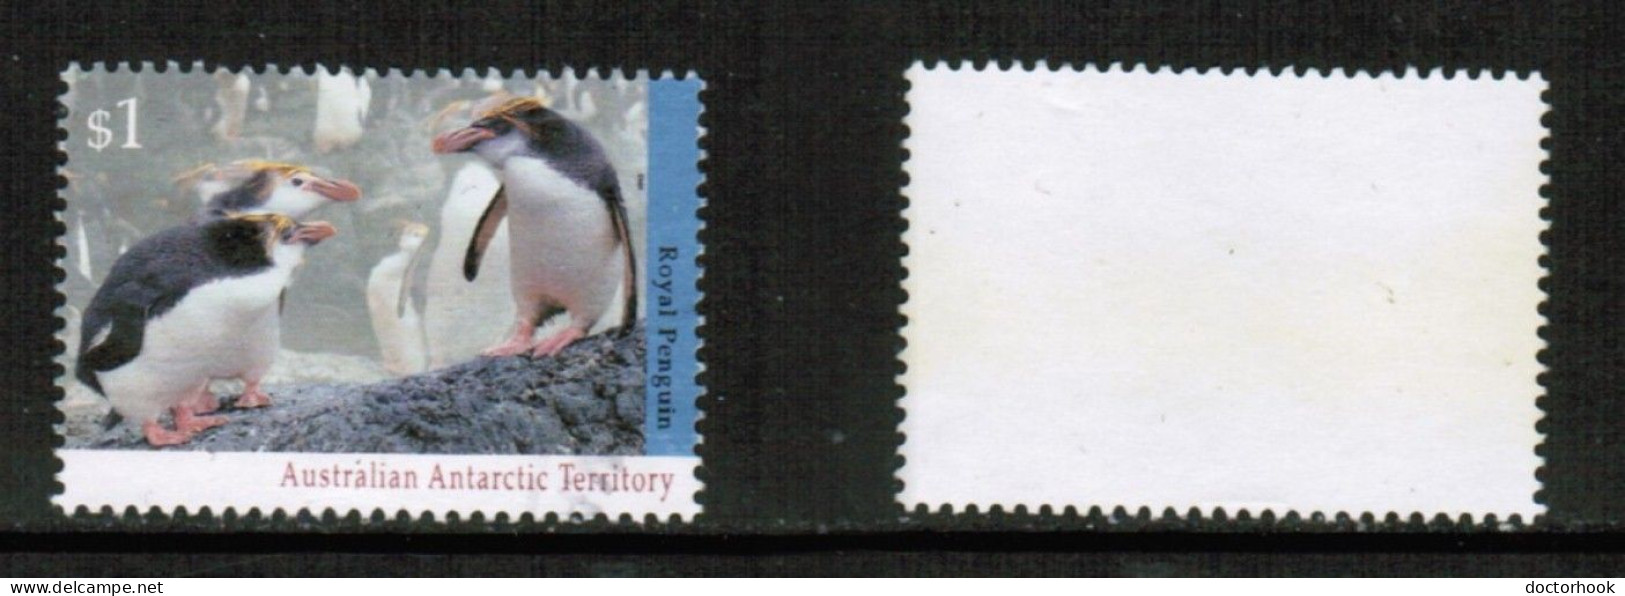 AUSTRALIAN ANTARCTIC TERRITORY   Scott # L 86A USED (CONDITION AS PER SCAN) (Stamp Scan # 928-6) - Oblitérés